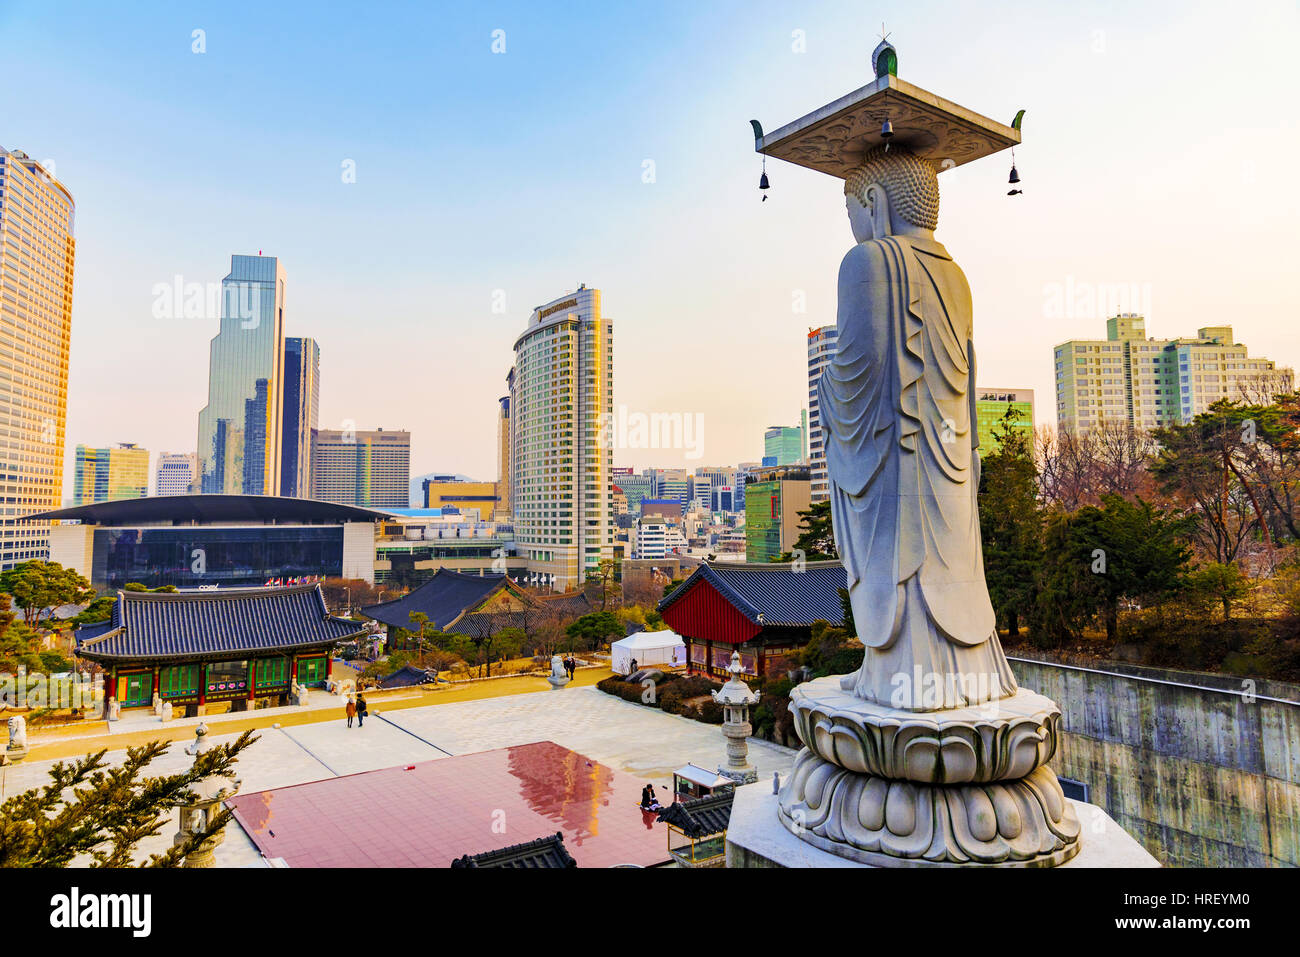 SEOUL, SOUTH KOREA - FEBURARY 27: This is Bongeunsa temple a famous buddhist temple and tourist attraction on Feburary 27, 2016 in Seoul. Stock Photo